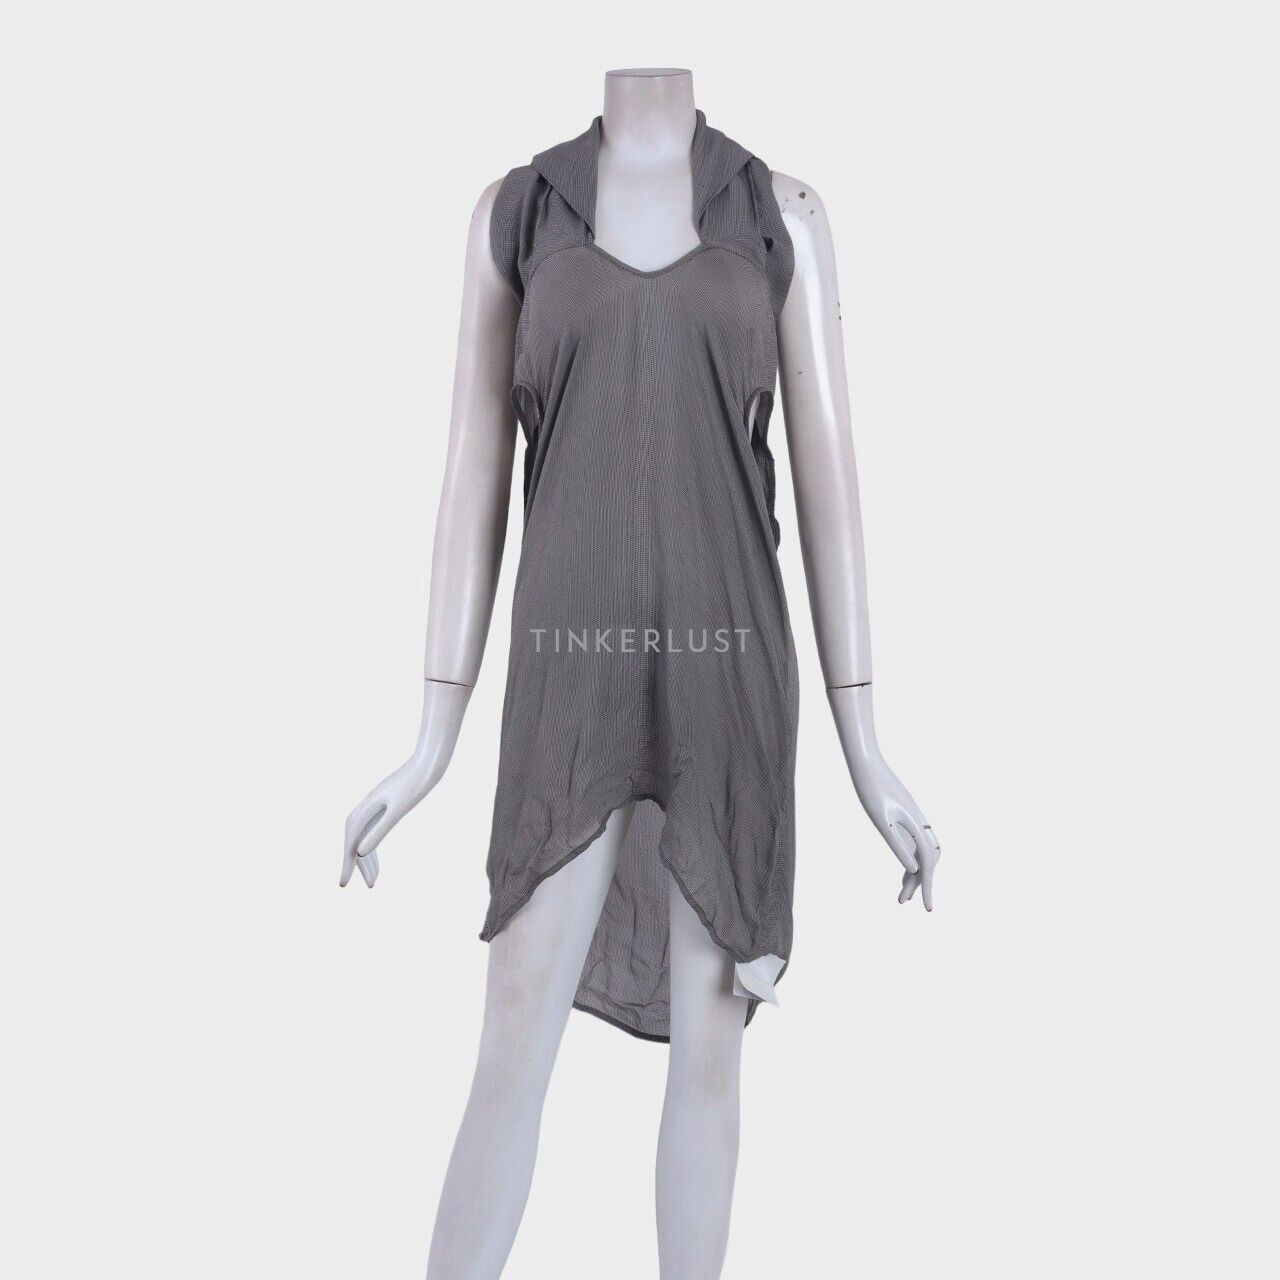 Guess by Marciano Grey Sleeveless